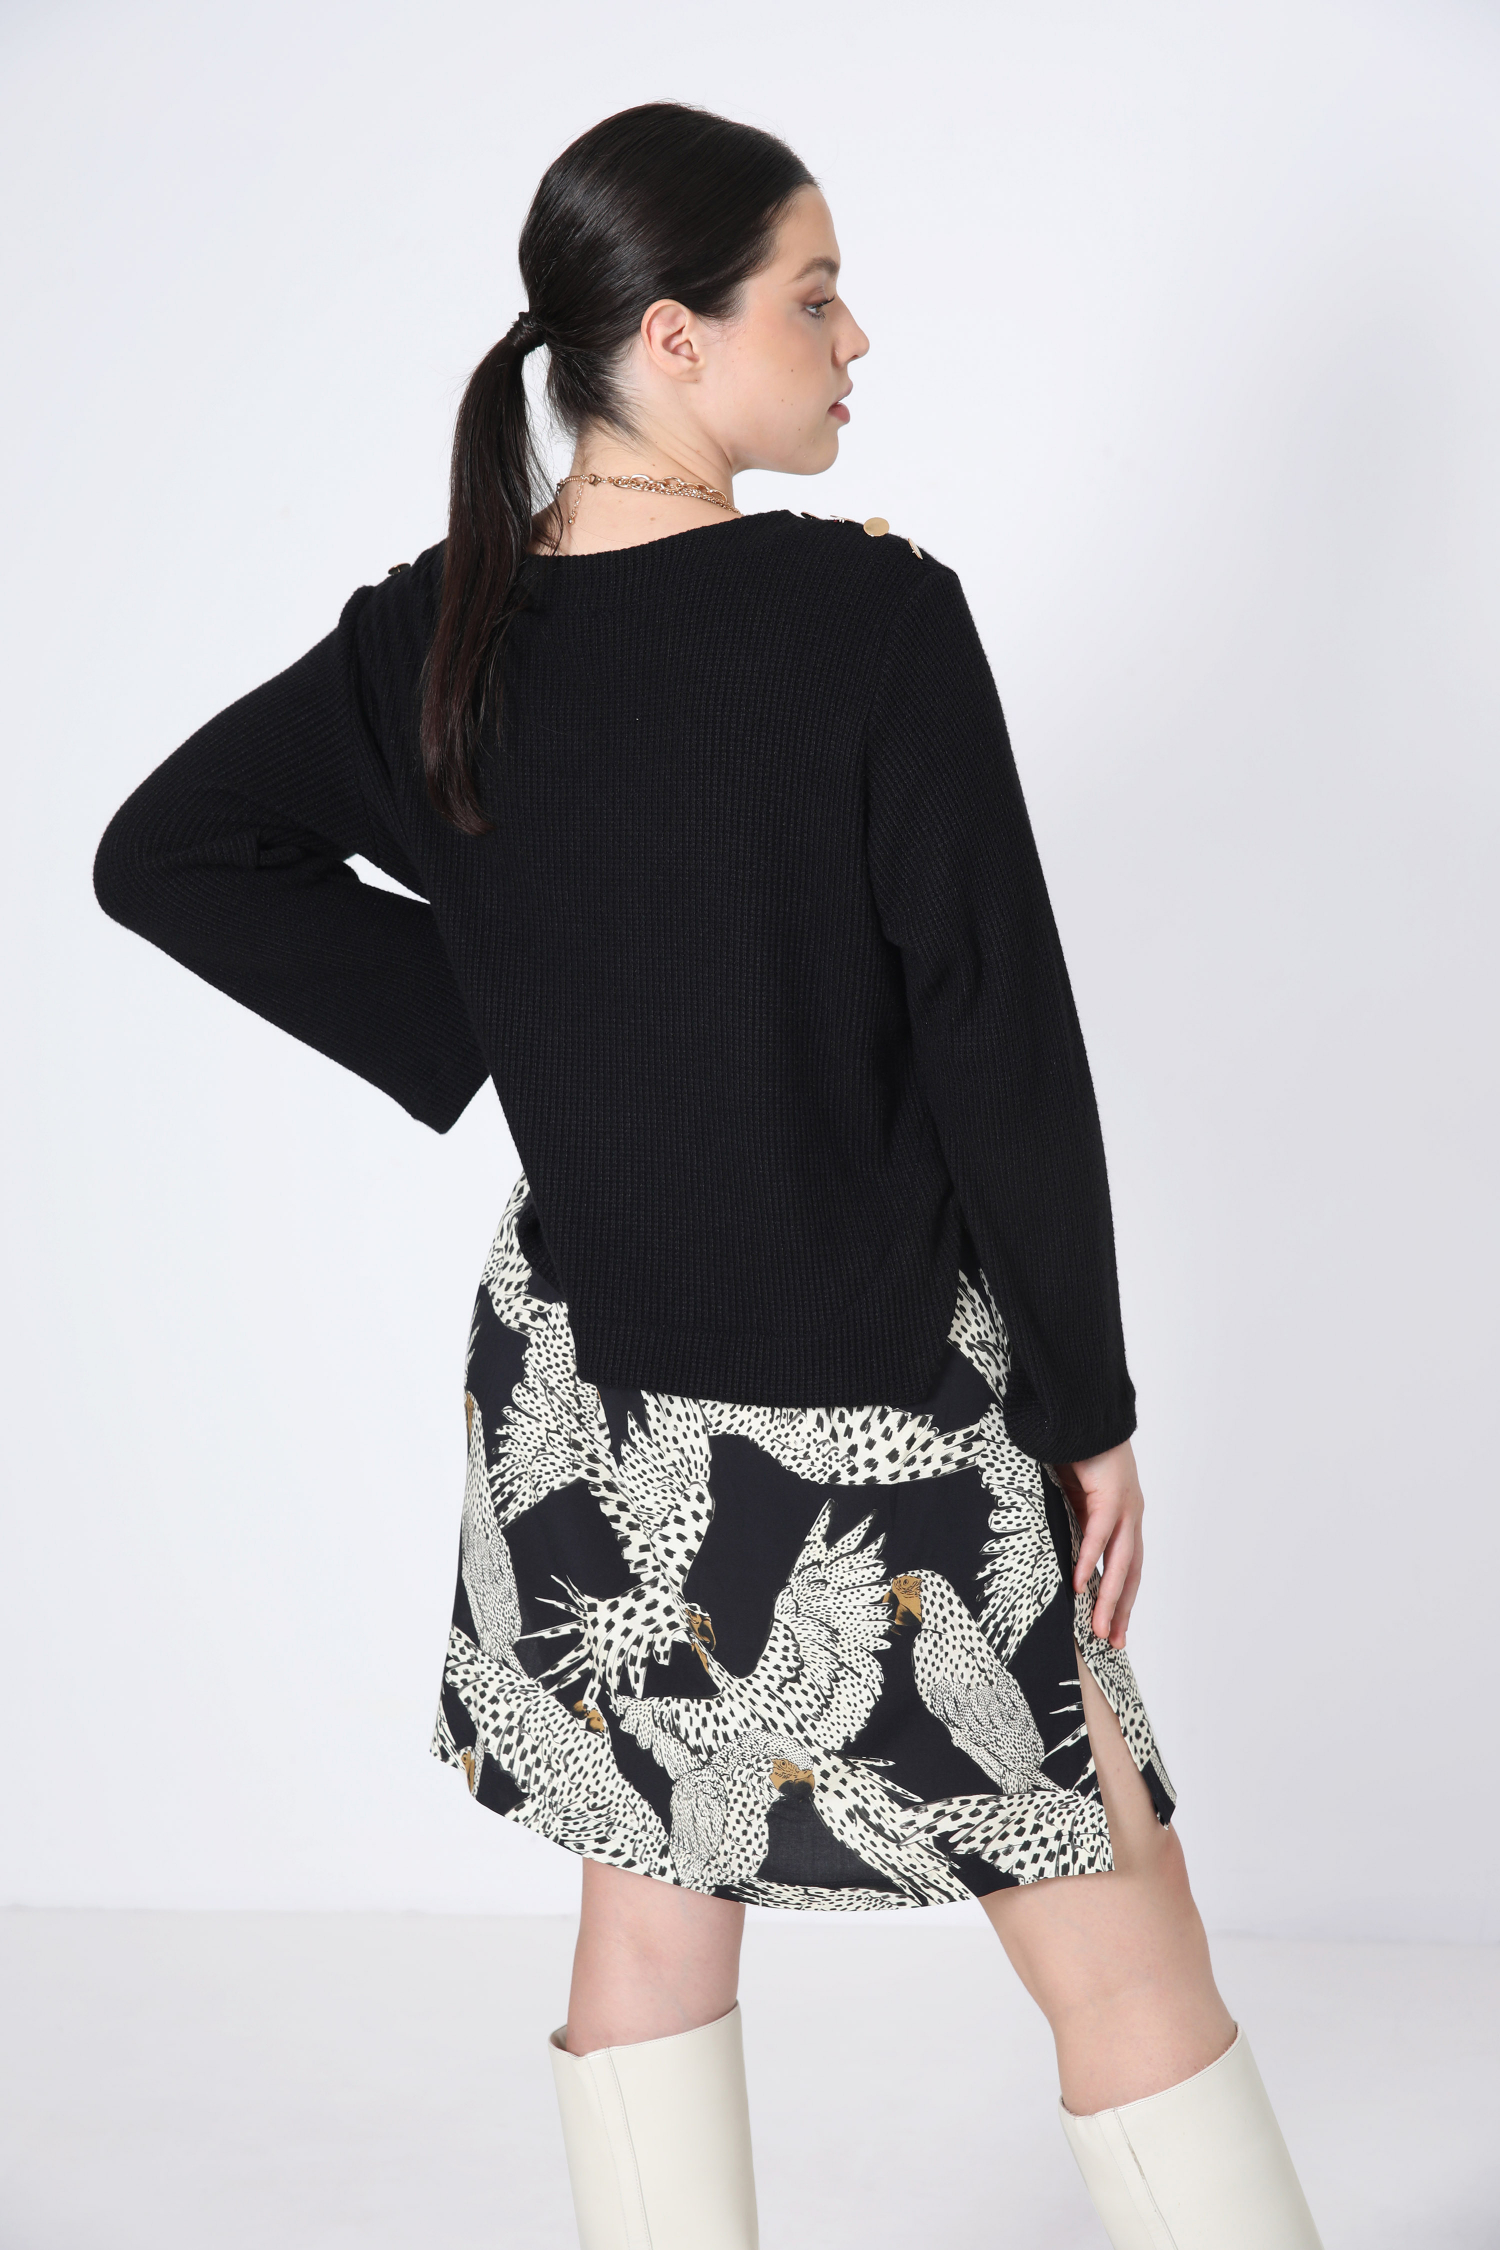 Plain knit sweater with overlay effect with printed bottom.